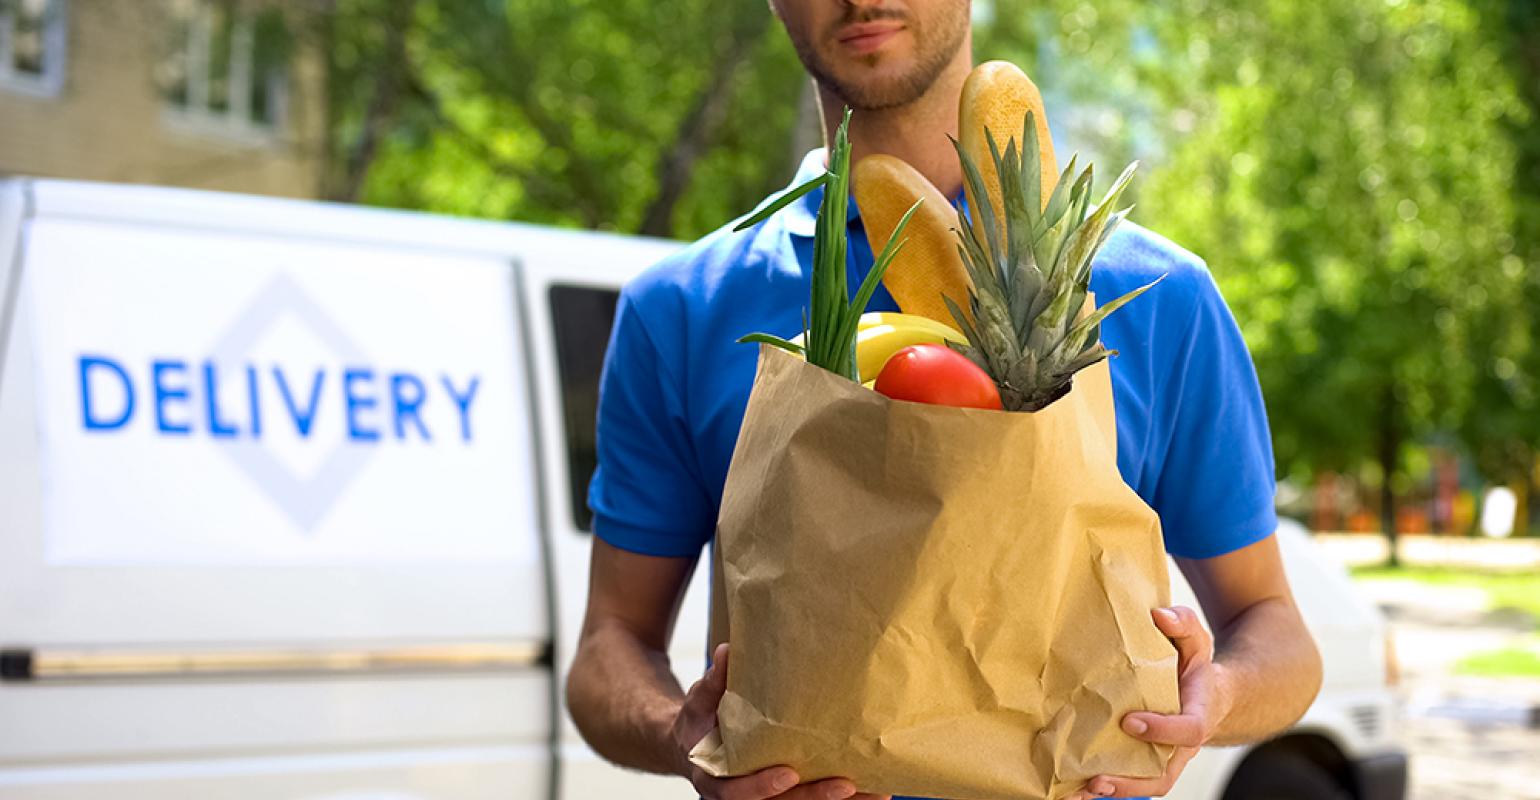 Grocery delivery slots are filling up quickly. Here are other ways